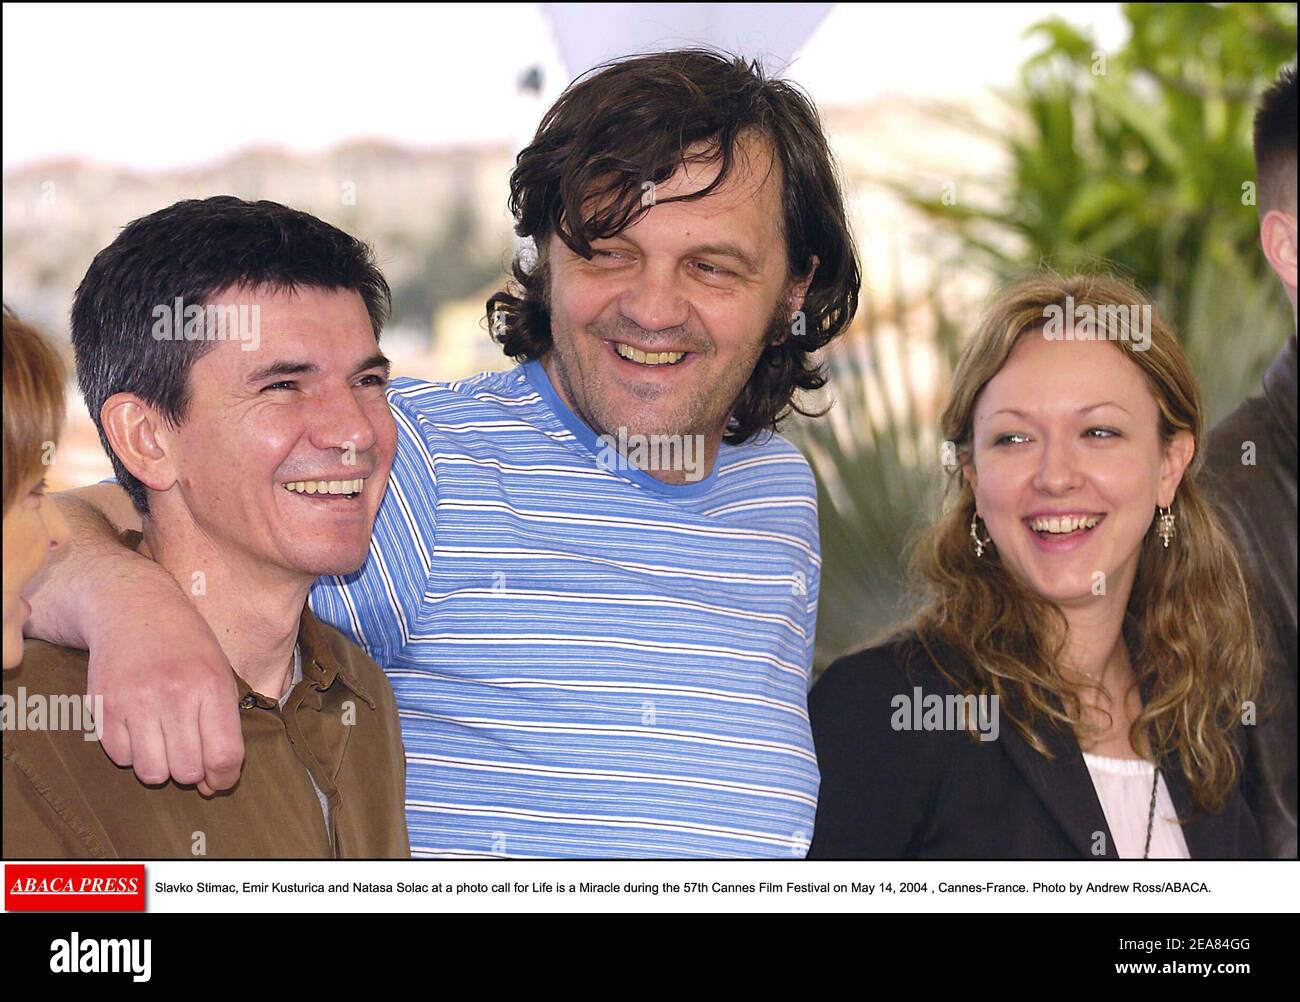 Slavko Stimac, Emir Kusturica and Natasa Solak at a photo call for Life is a Miracle during the 57th Cannes Film Festival on May 14, 2004 , Cannes-France. Photo by Andrew Ross/ABACA. Stock Photo